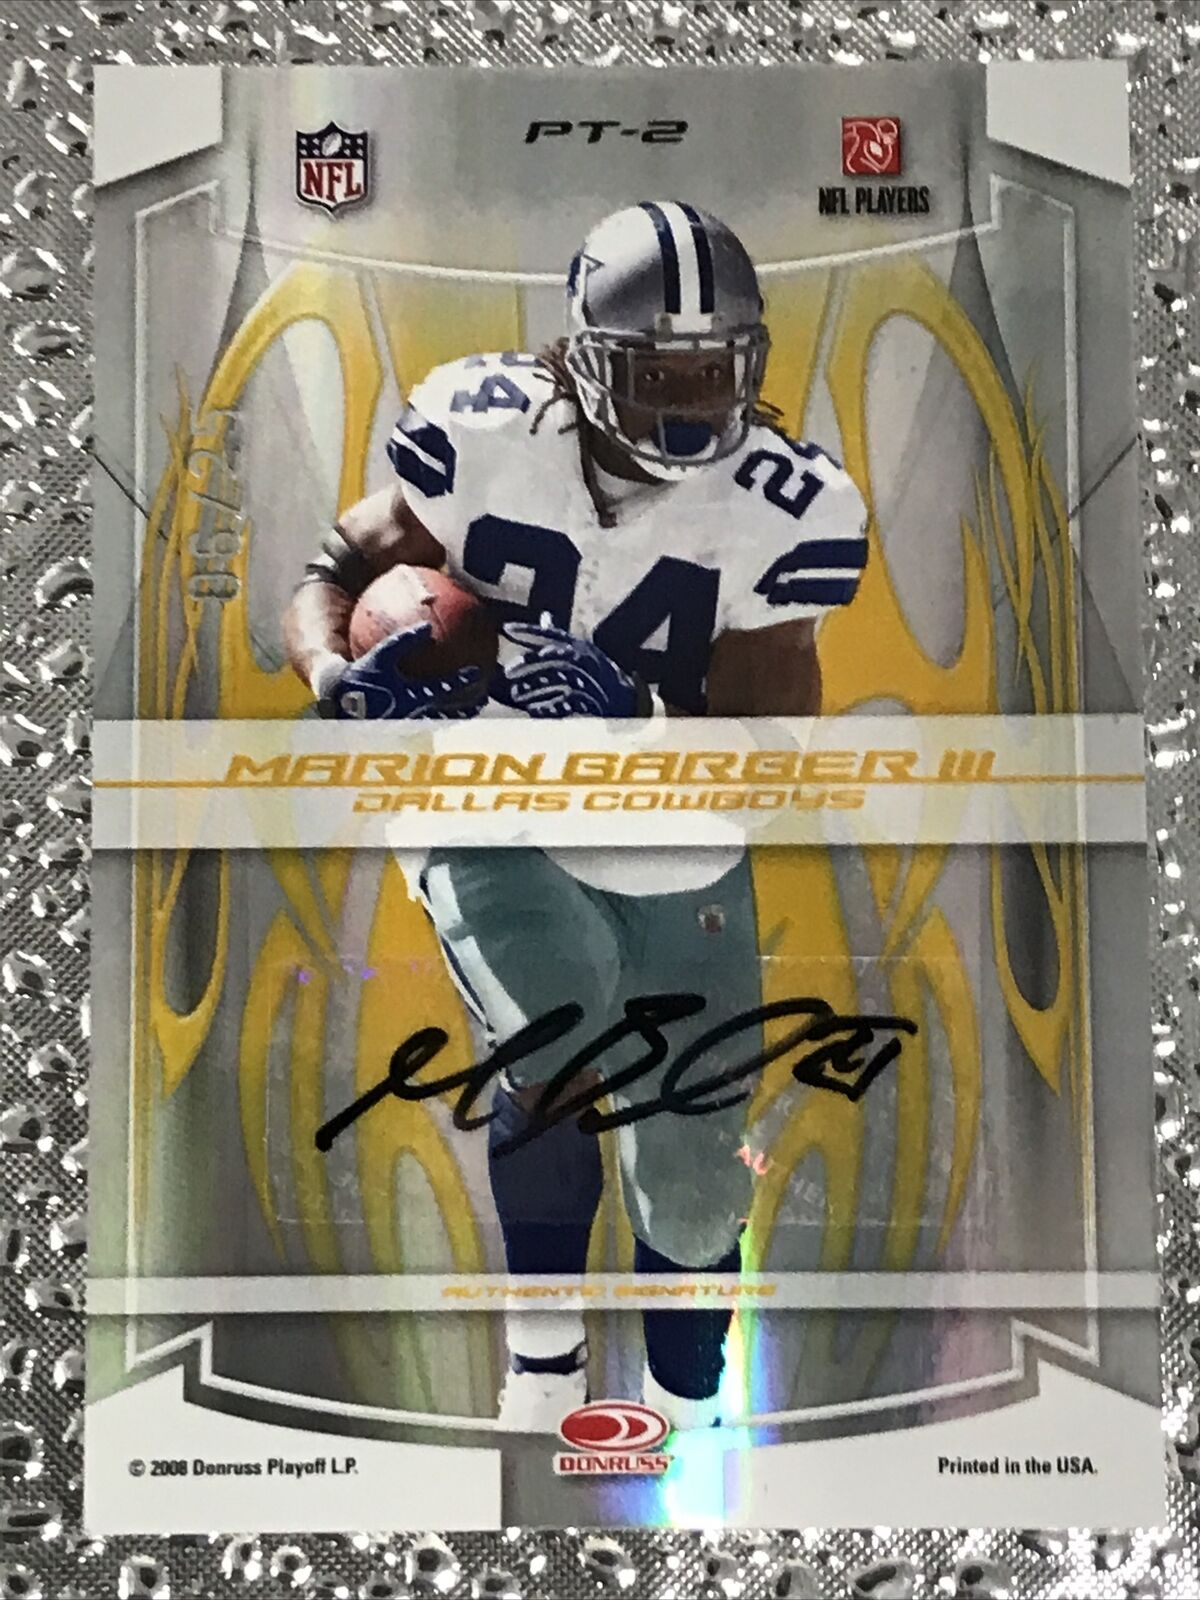 2008 Donruss Elite Passing the Torch /25 Emmitt Smith/Marion Barber III Auto **